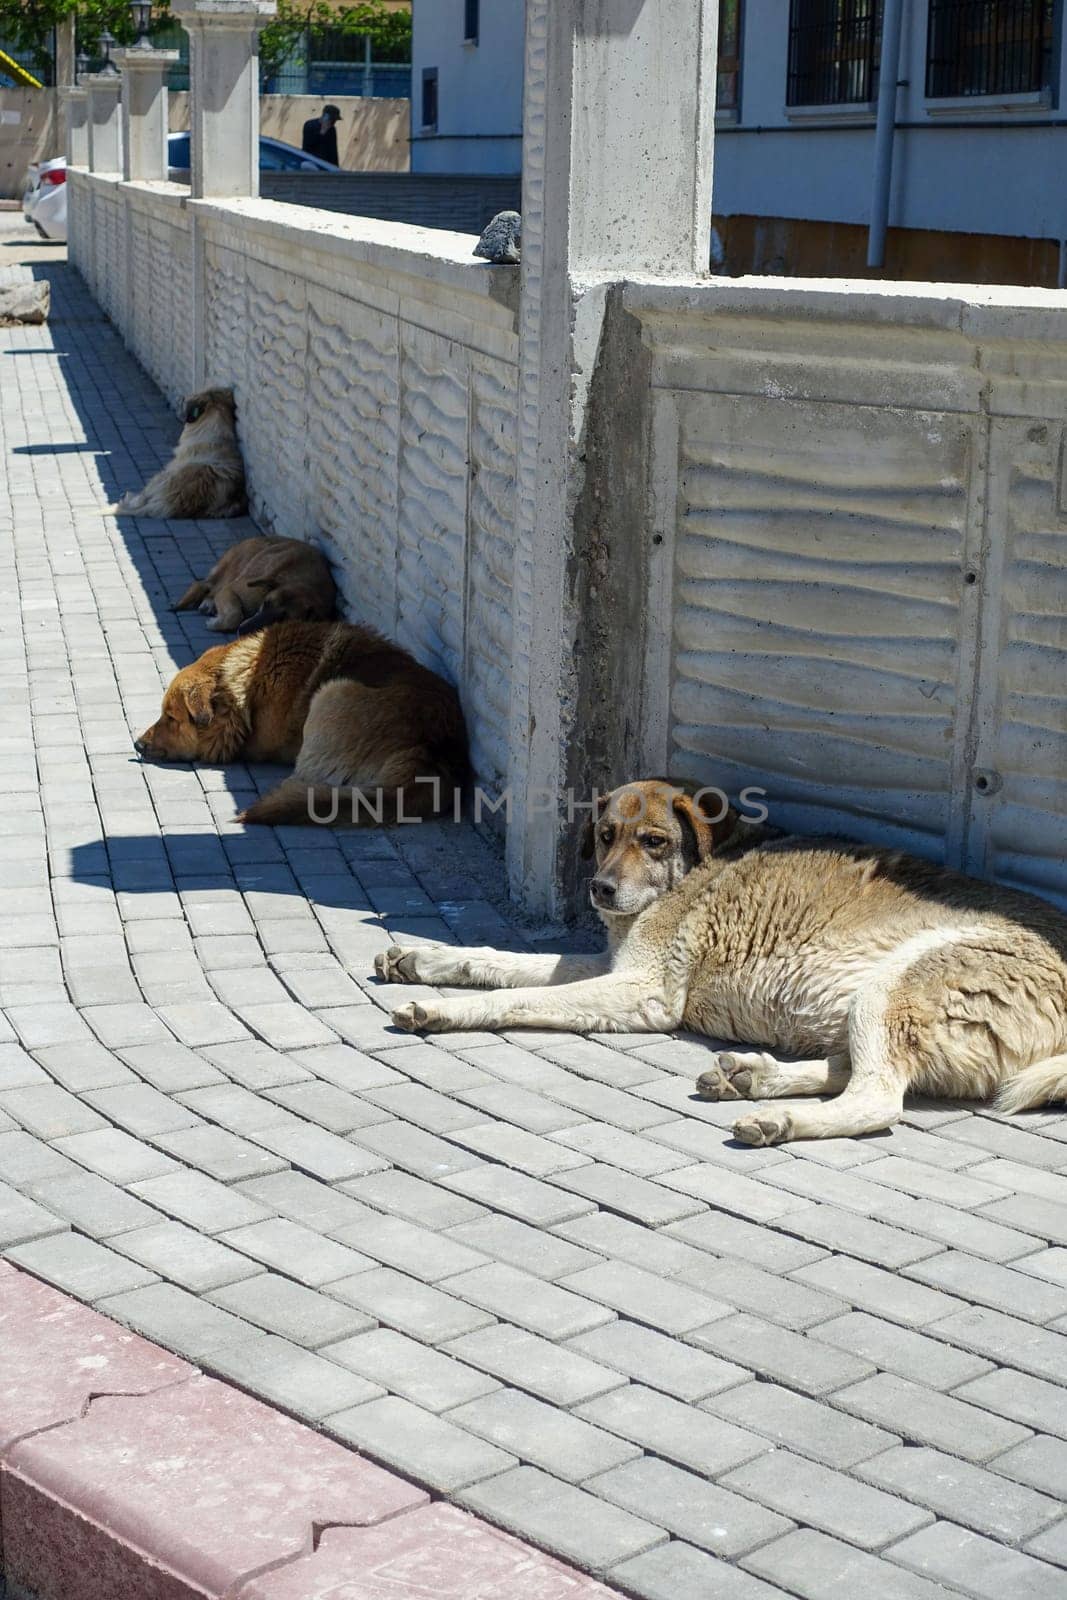 stray dogs lying on street pavements, stray dogs in the city, by nhatipoglu